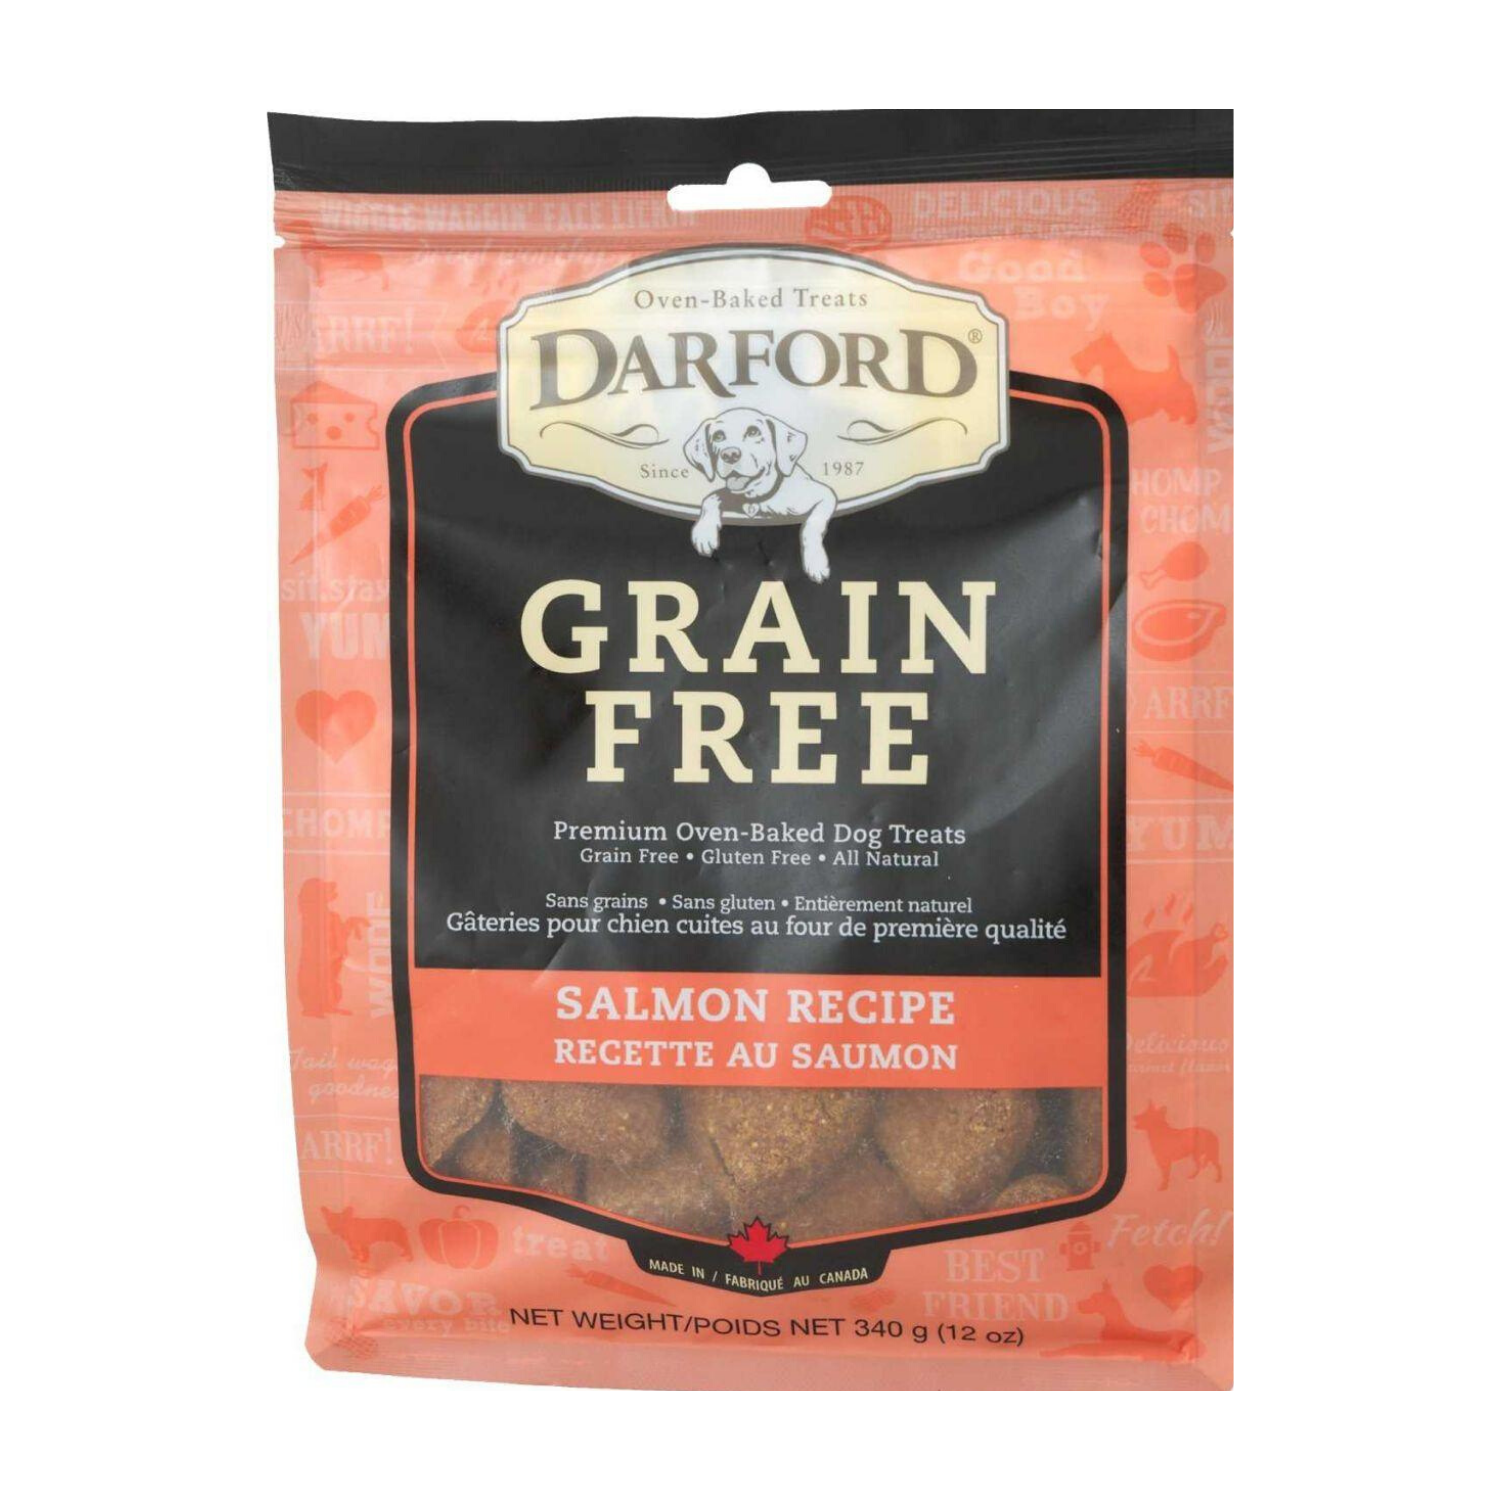 [DISCONTINUED] Darford Grain Free (Salmon) for Dogs - 340g